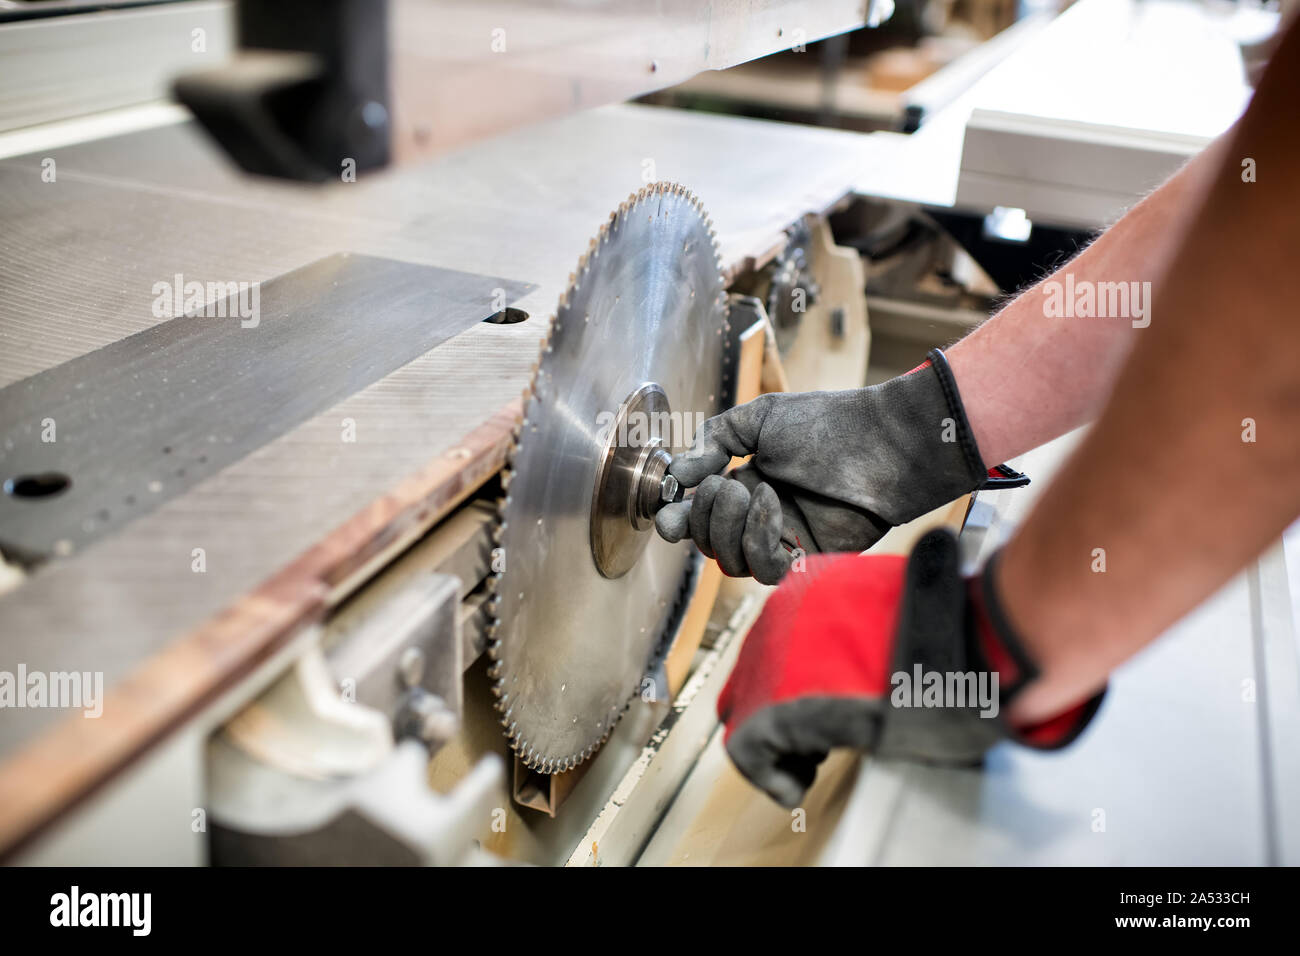 Carpenter adjusting the toothed round blade on a circular saw in a woodworking workshop in a close up on his gloved hands and the power tool Stock Photo